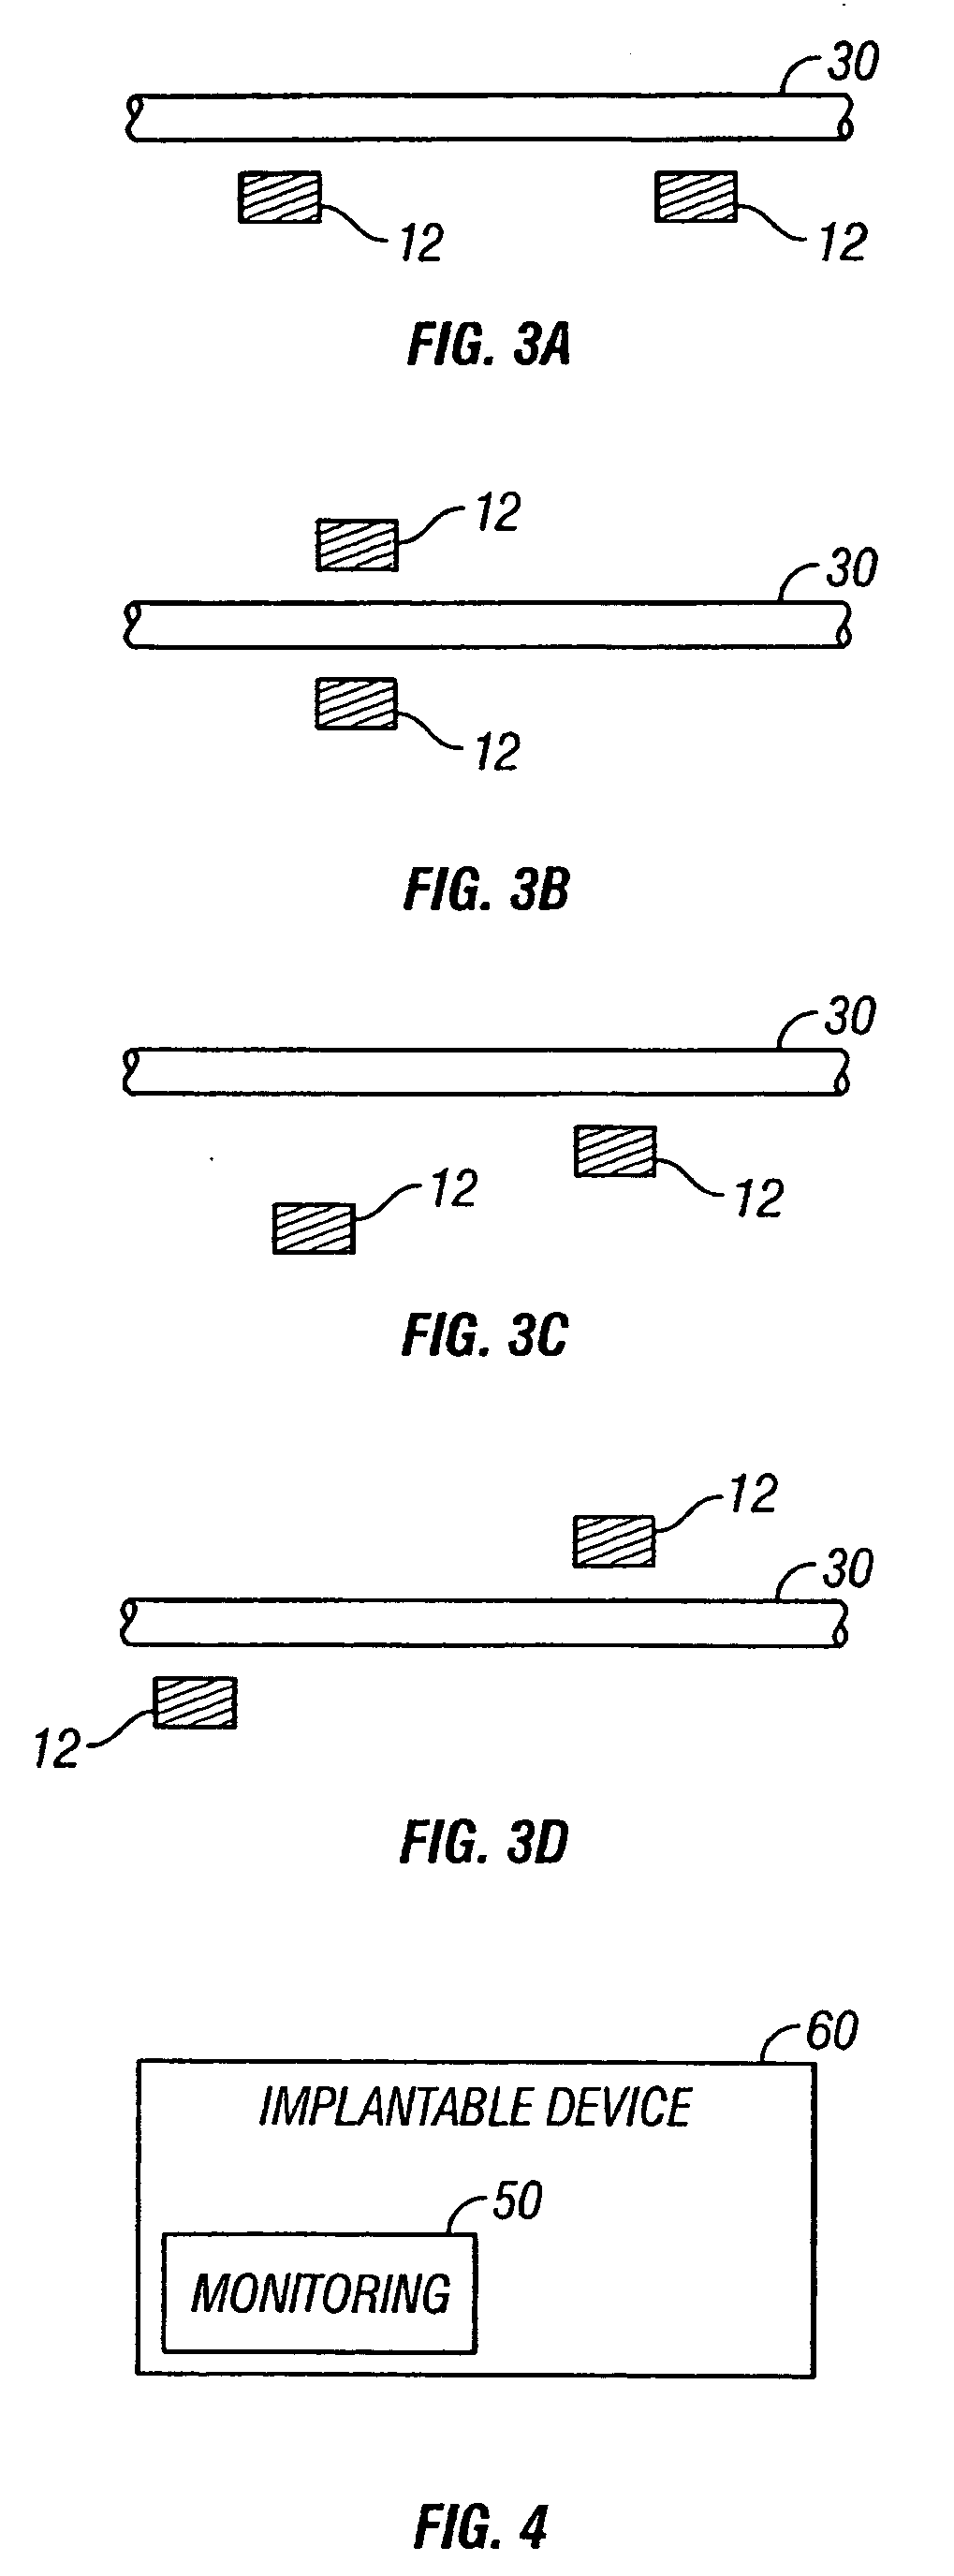 Portable device for monitoring electrocardiographic signals and indices of blood flow